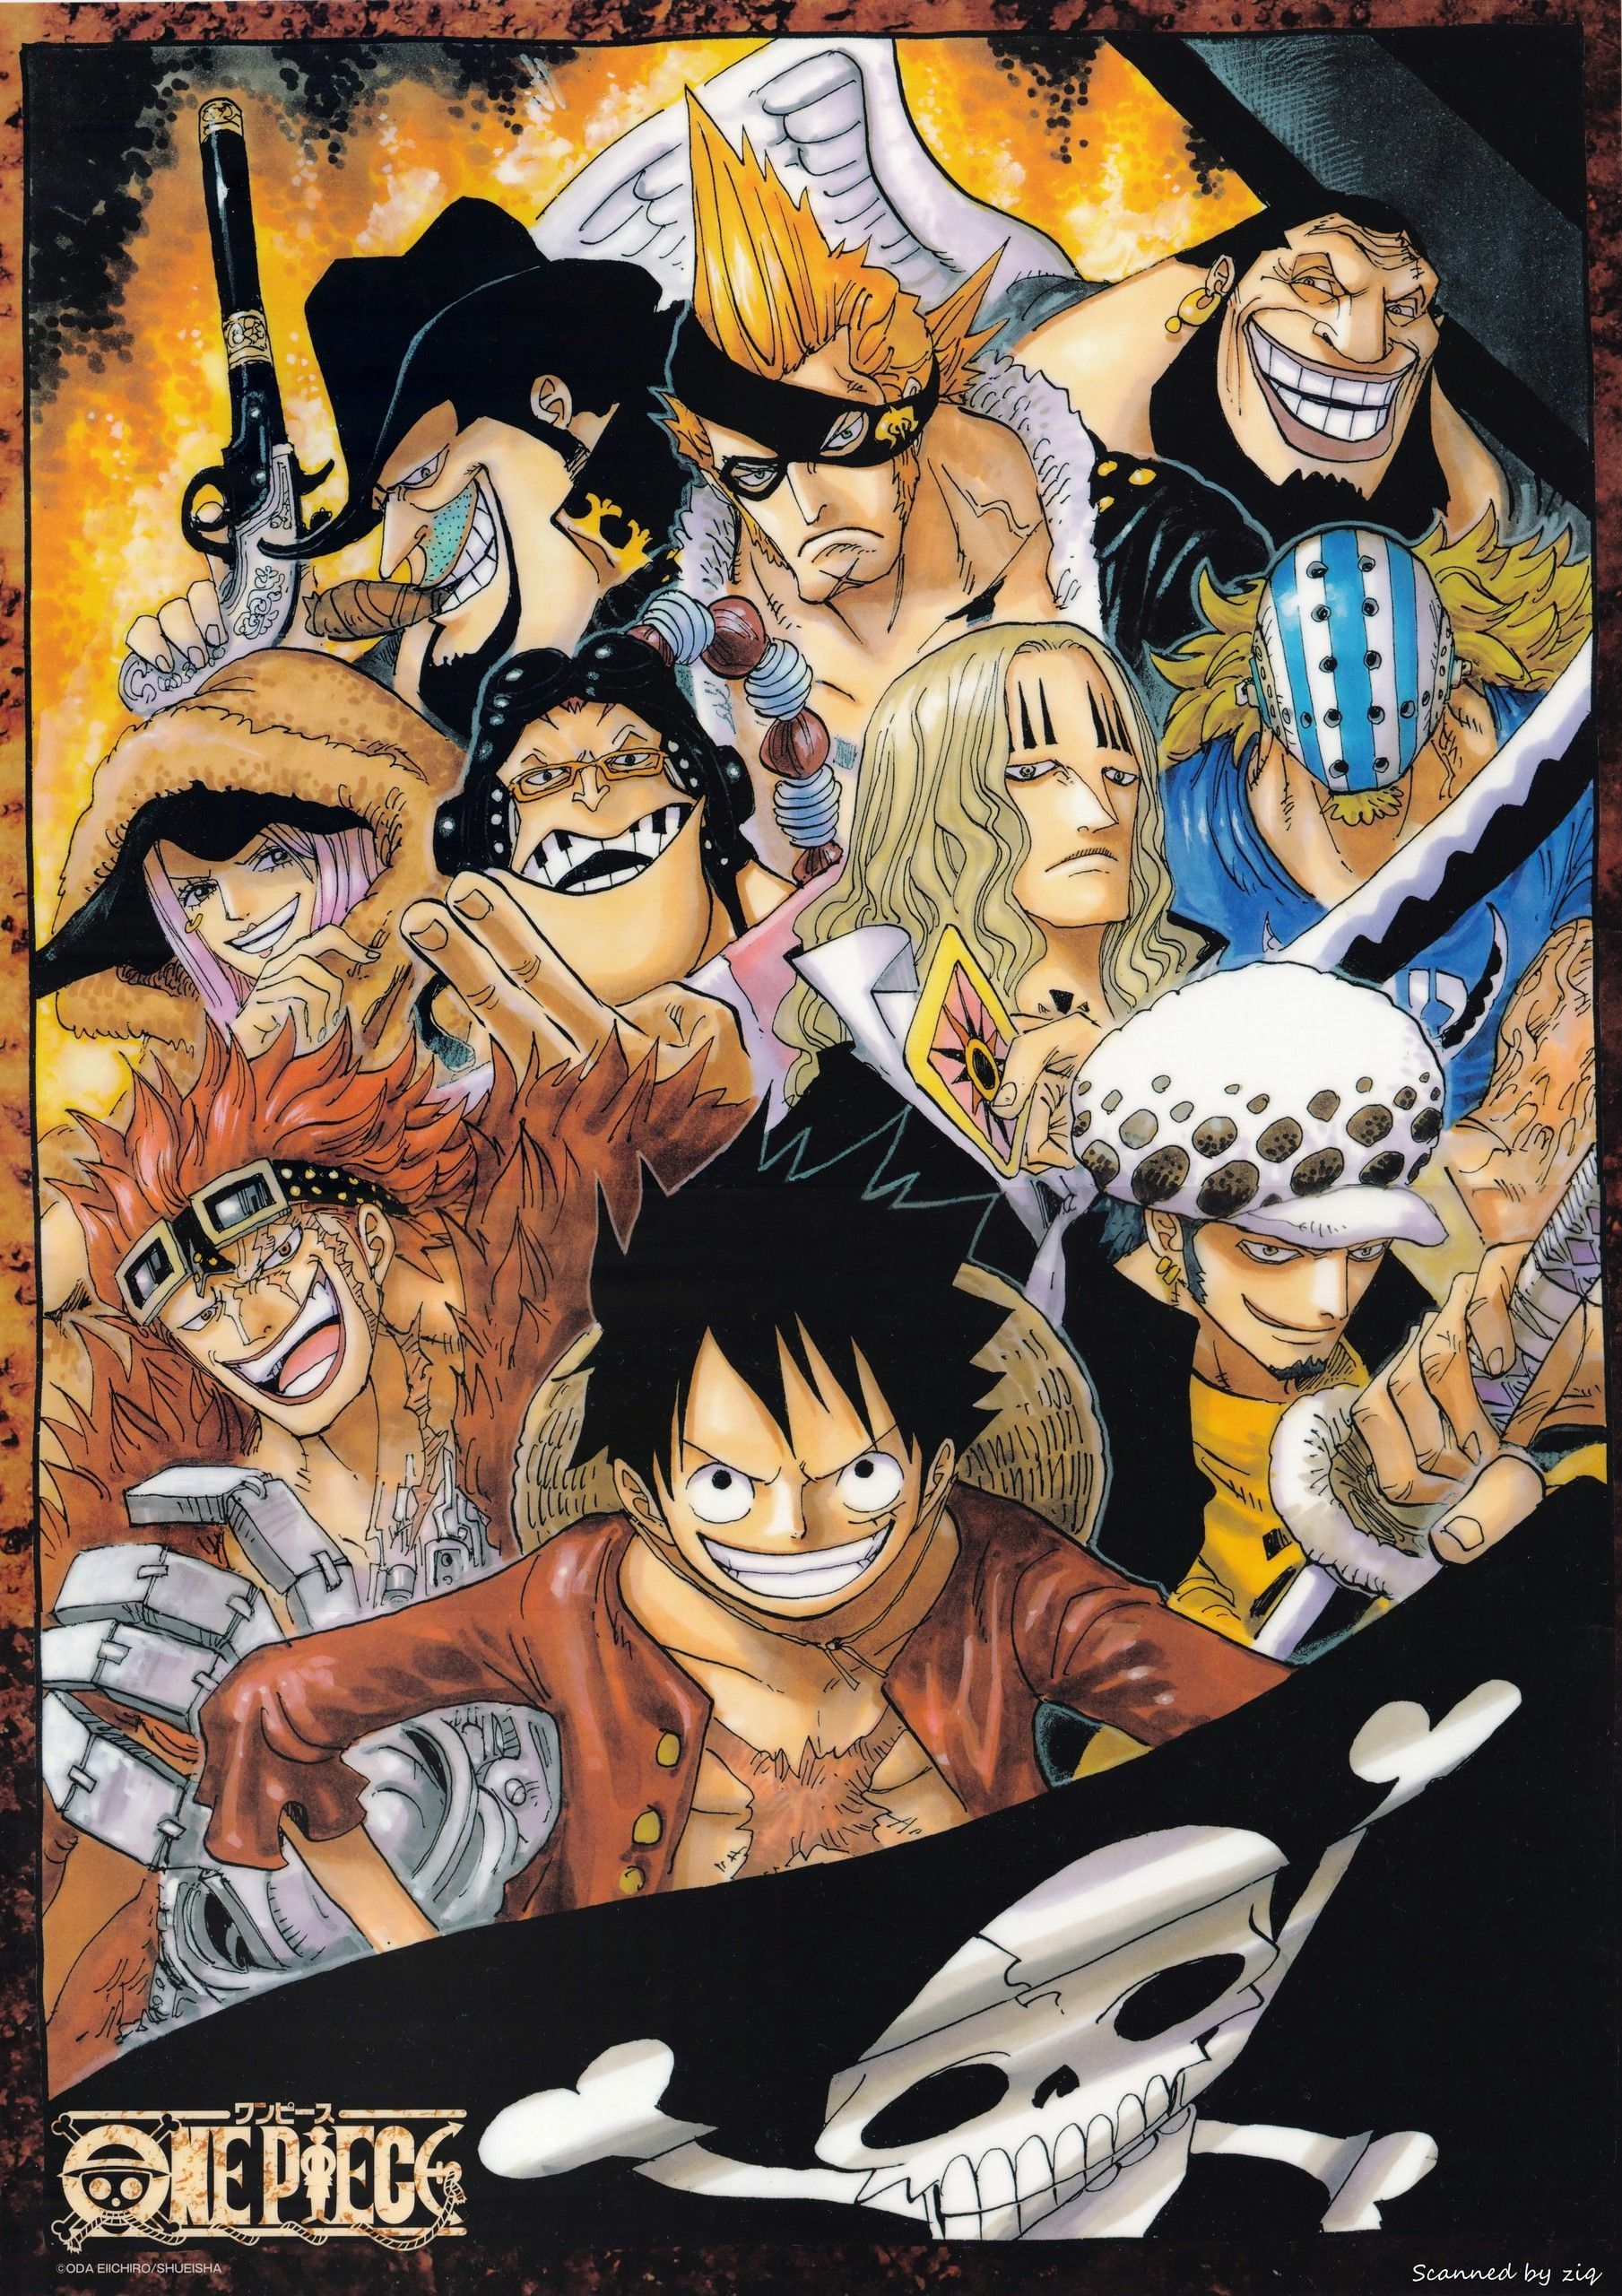 Hd Wallpaper For Laptop Full Screen One Piece